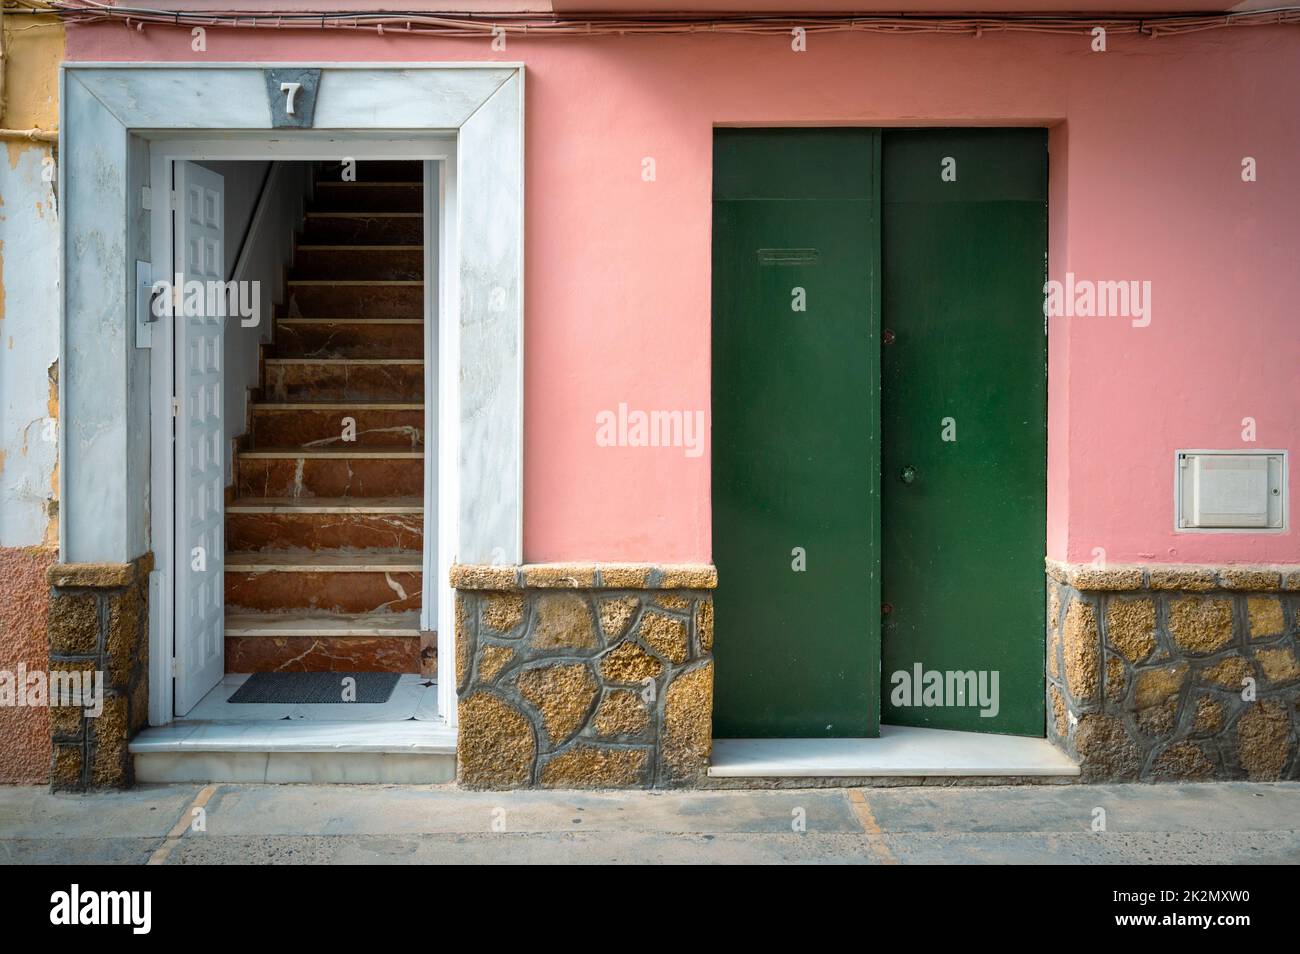 A stairway and door in an old building painted pink and green in Spain Stock Photo